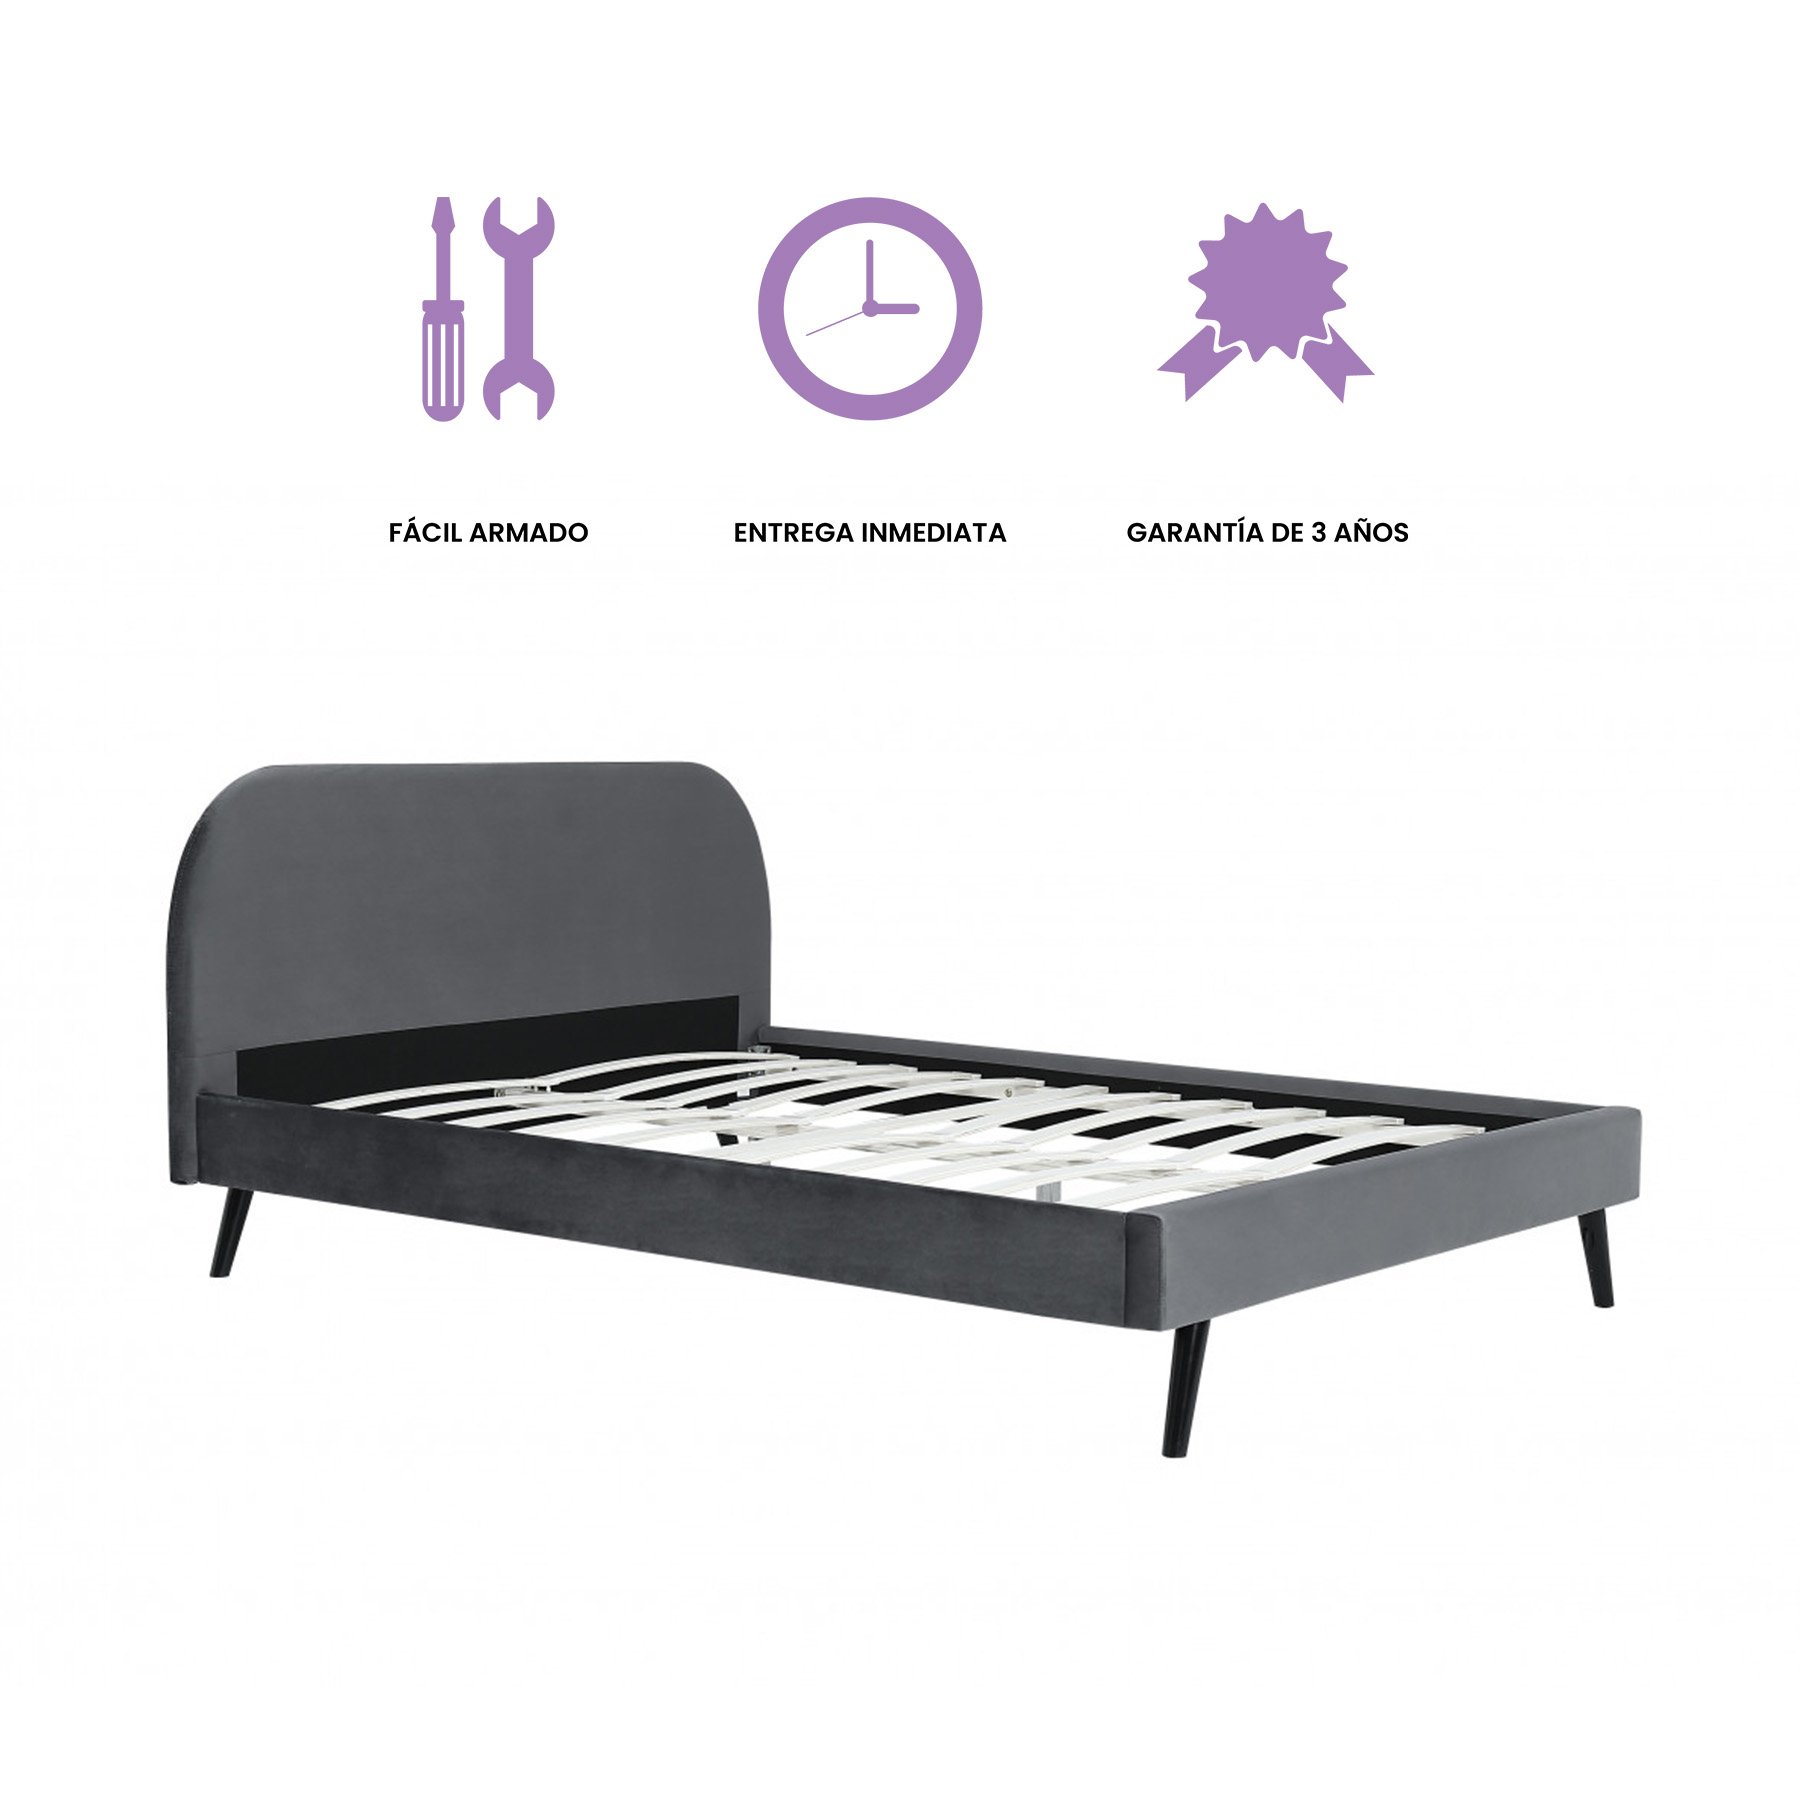 Luft And Drom, Base De Cama Gigisky Individual Gris Obscuro